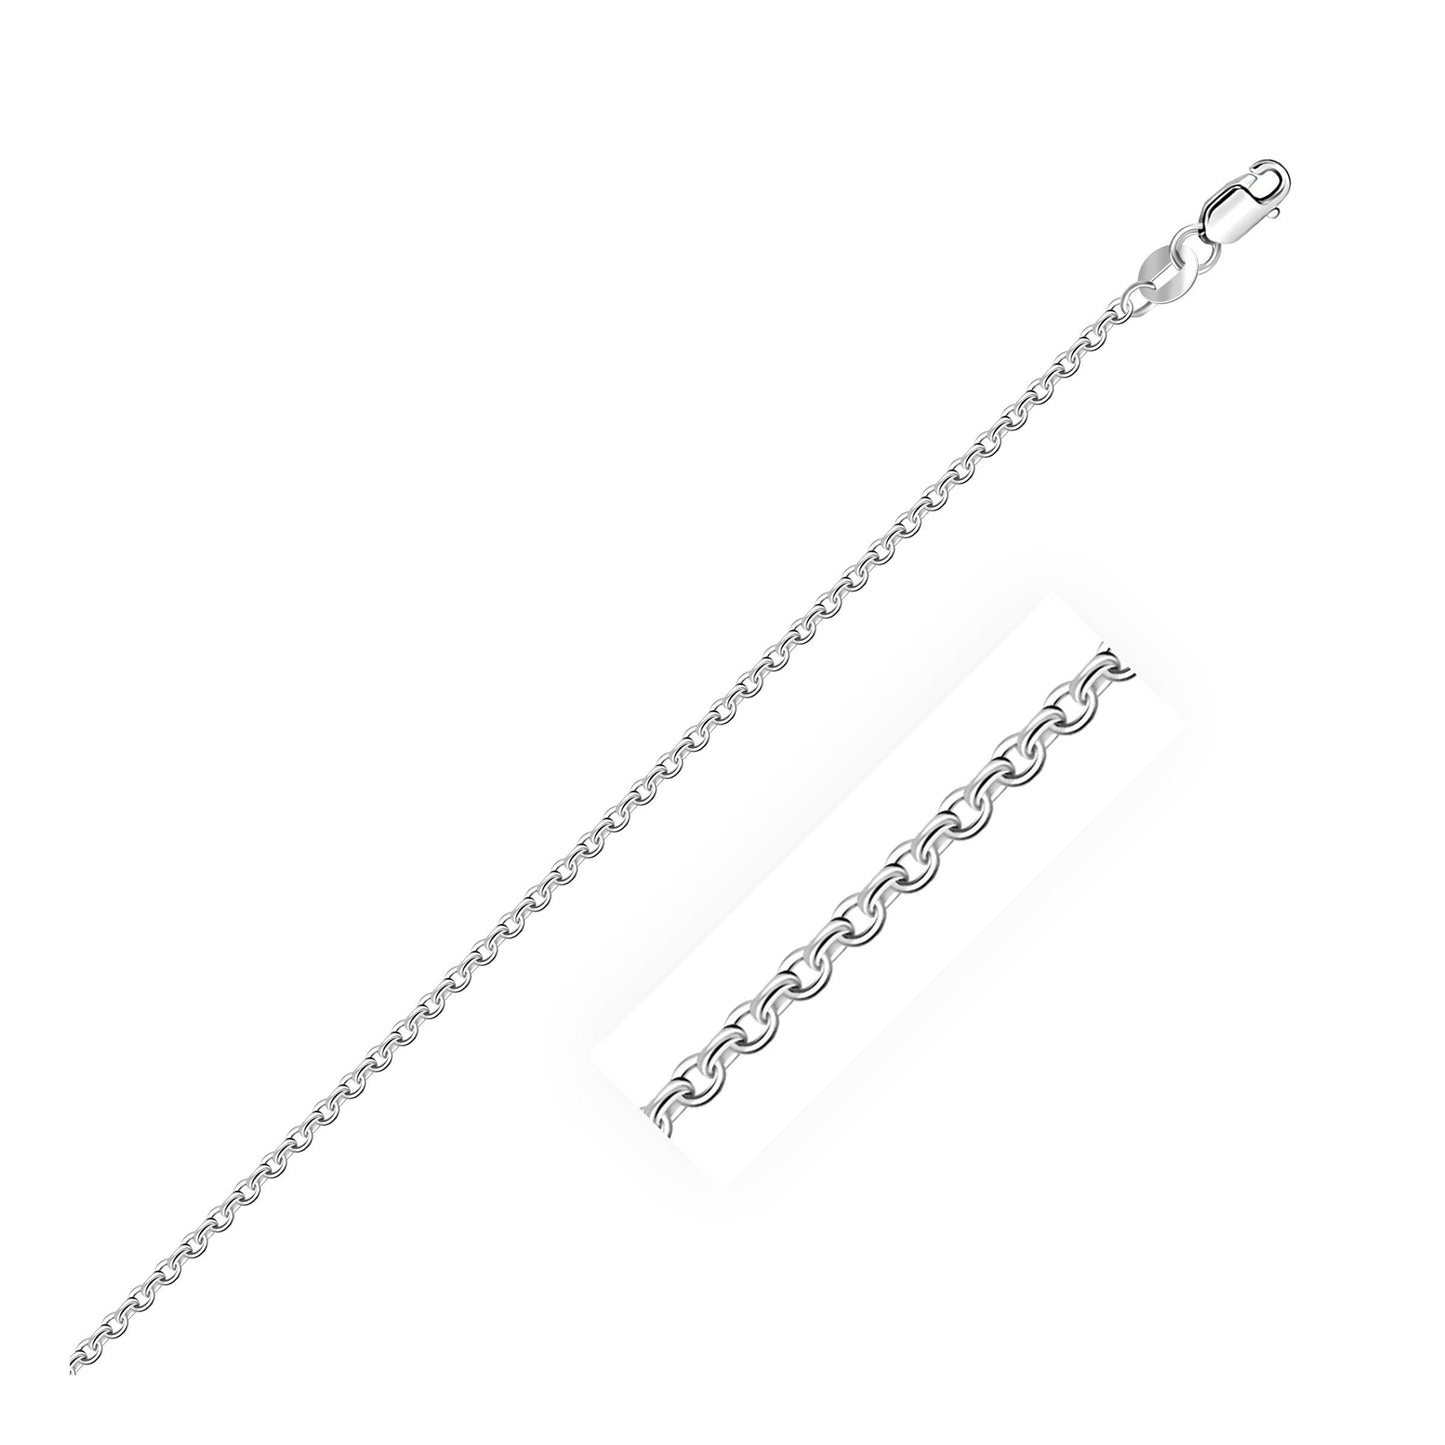 14k White Gold Cable Link Chain in 1.5 mm